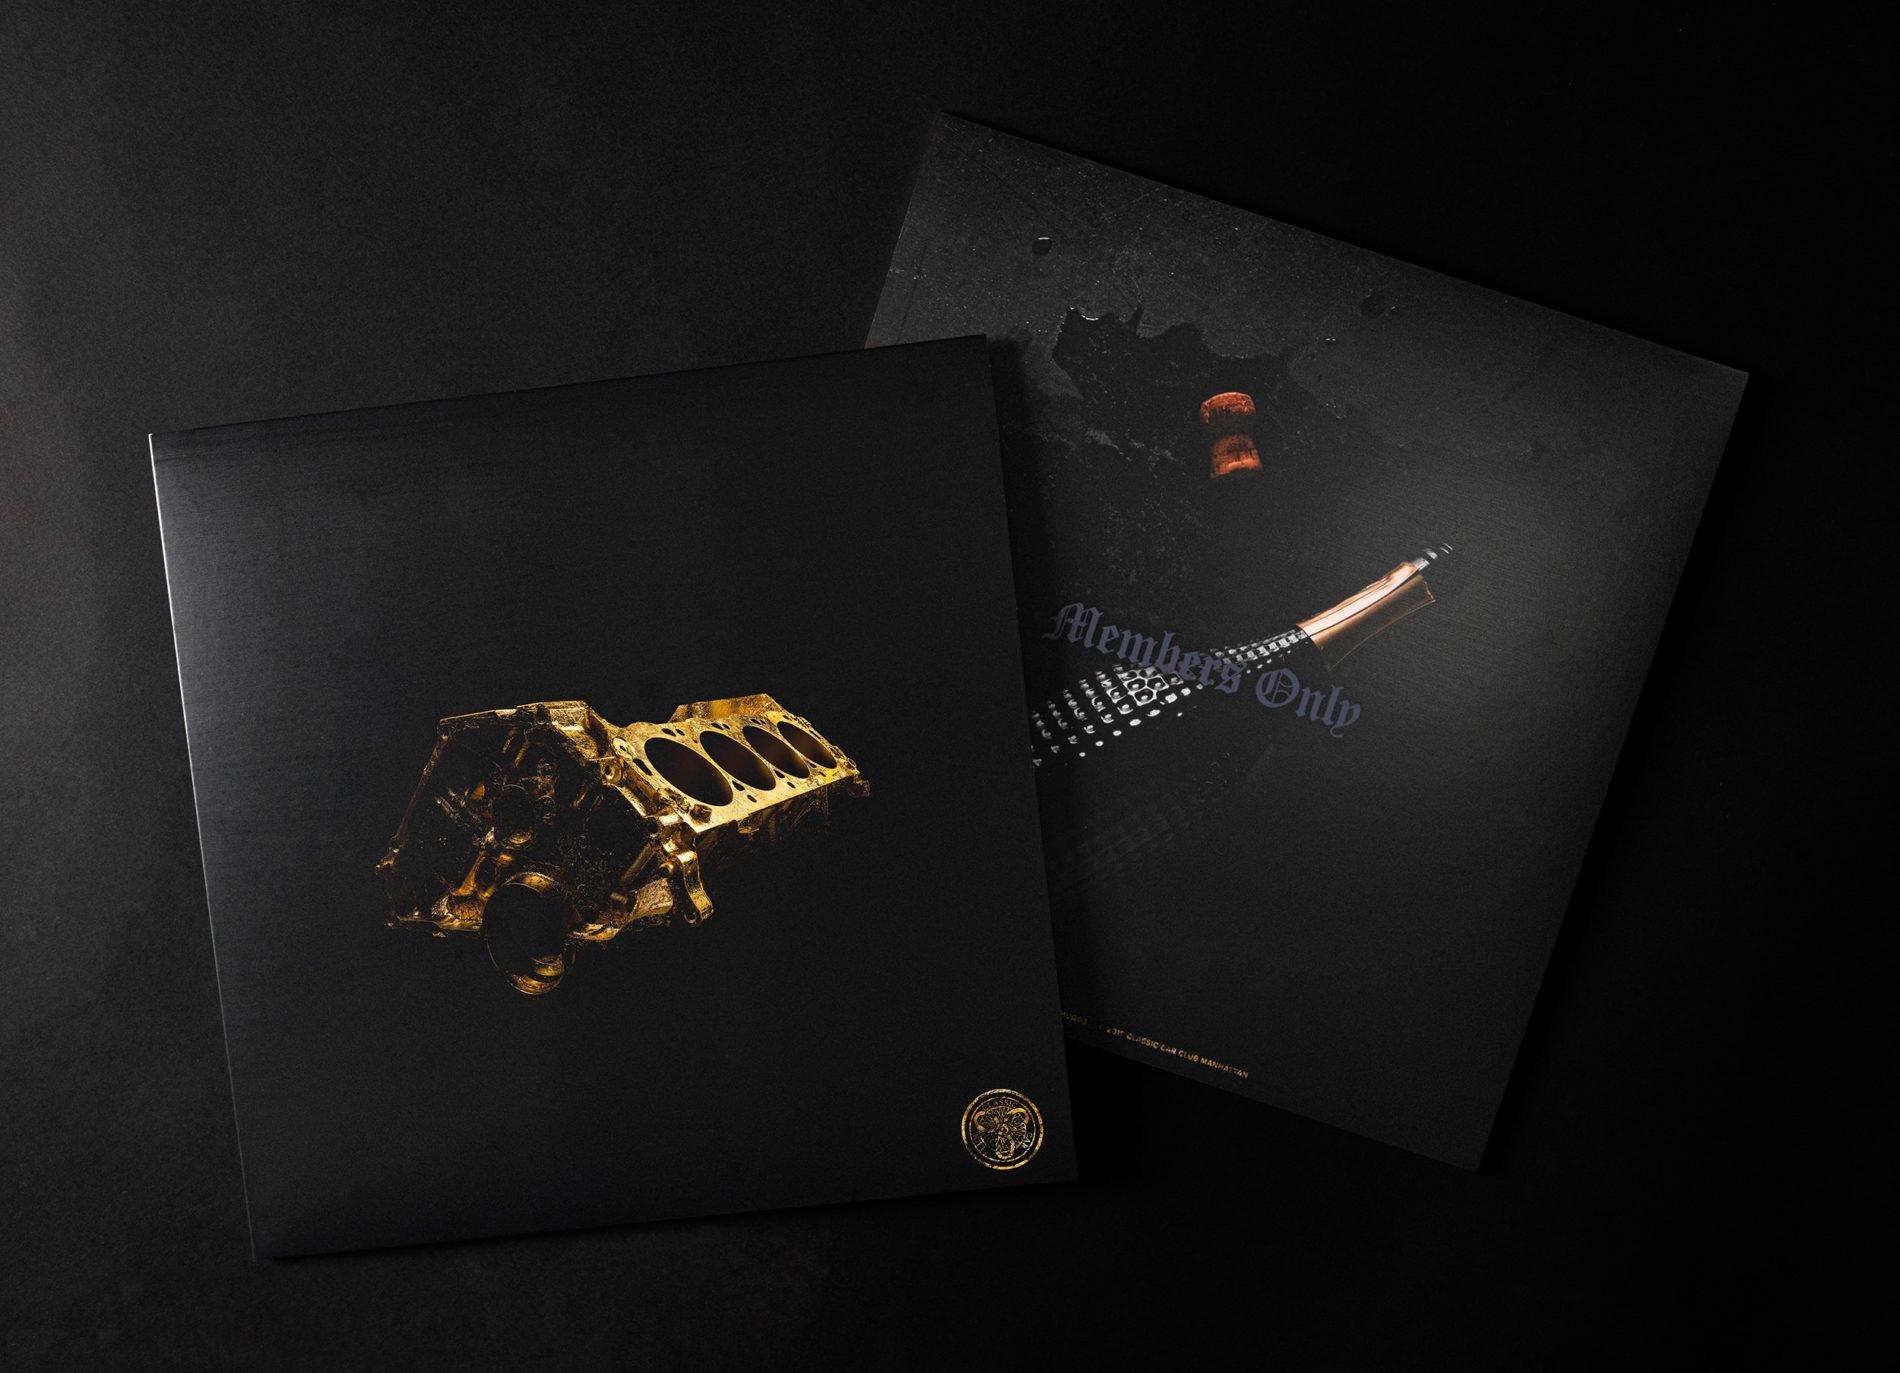 A photograph of the members only album packaging — front and back views of the vinyl record.